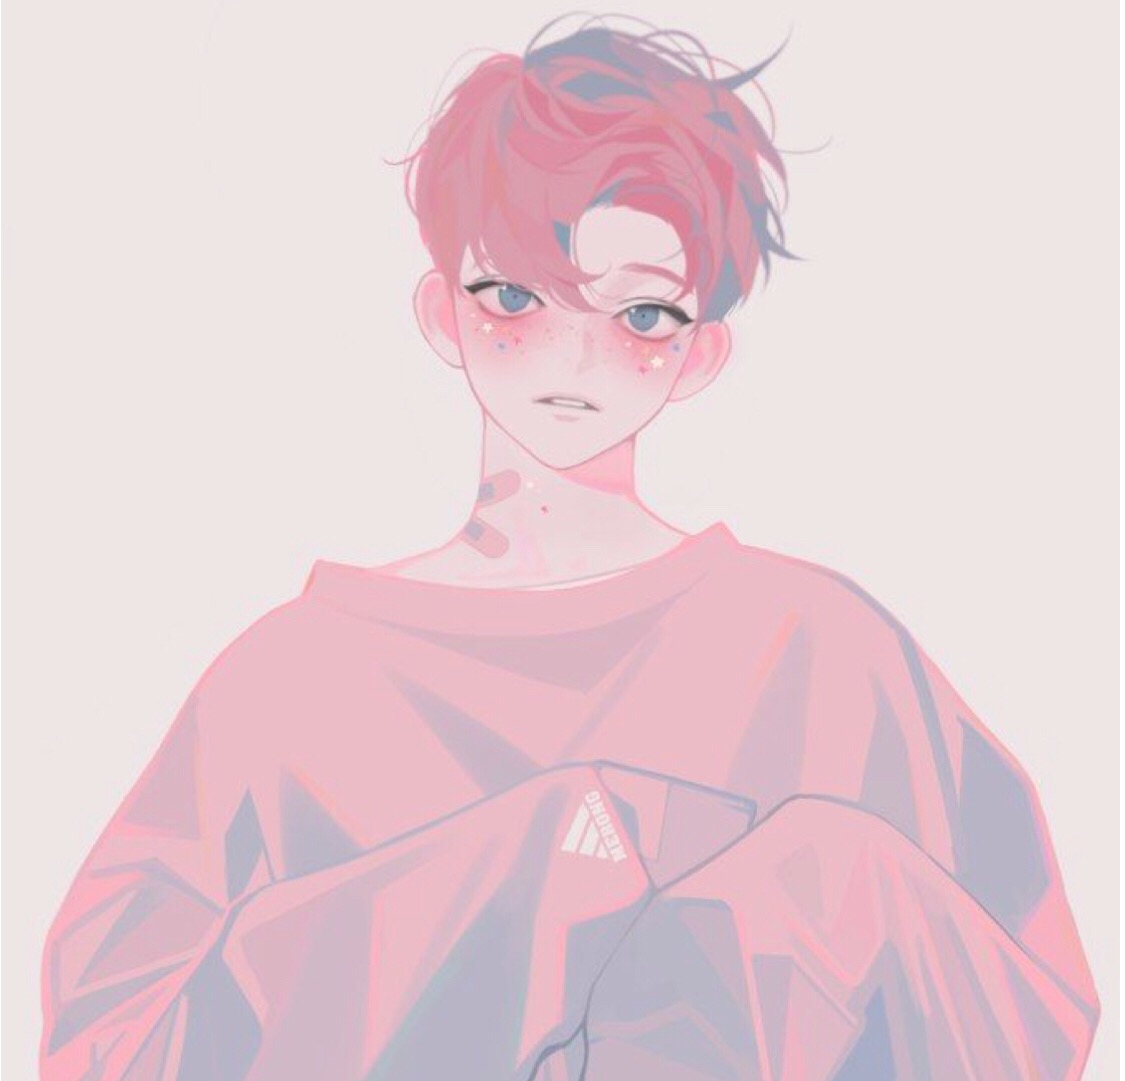 Anime Boy Pink Hair - Curly Haired Anime Girl, HD Png Download ,  Transparent Png Image - PNGitem